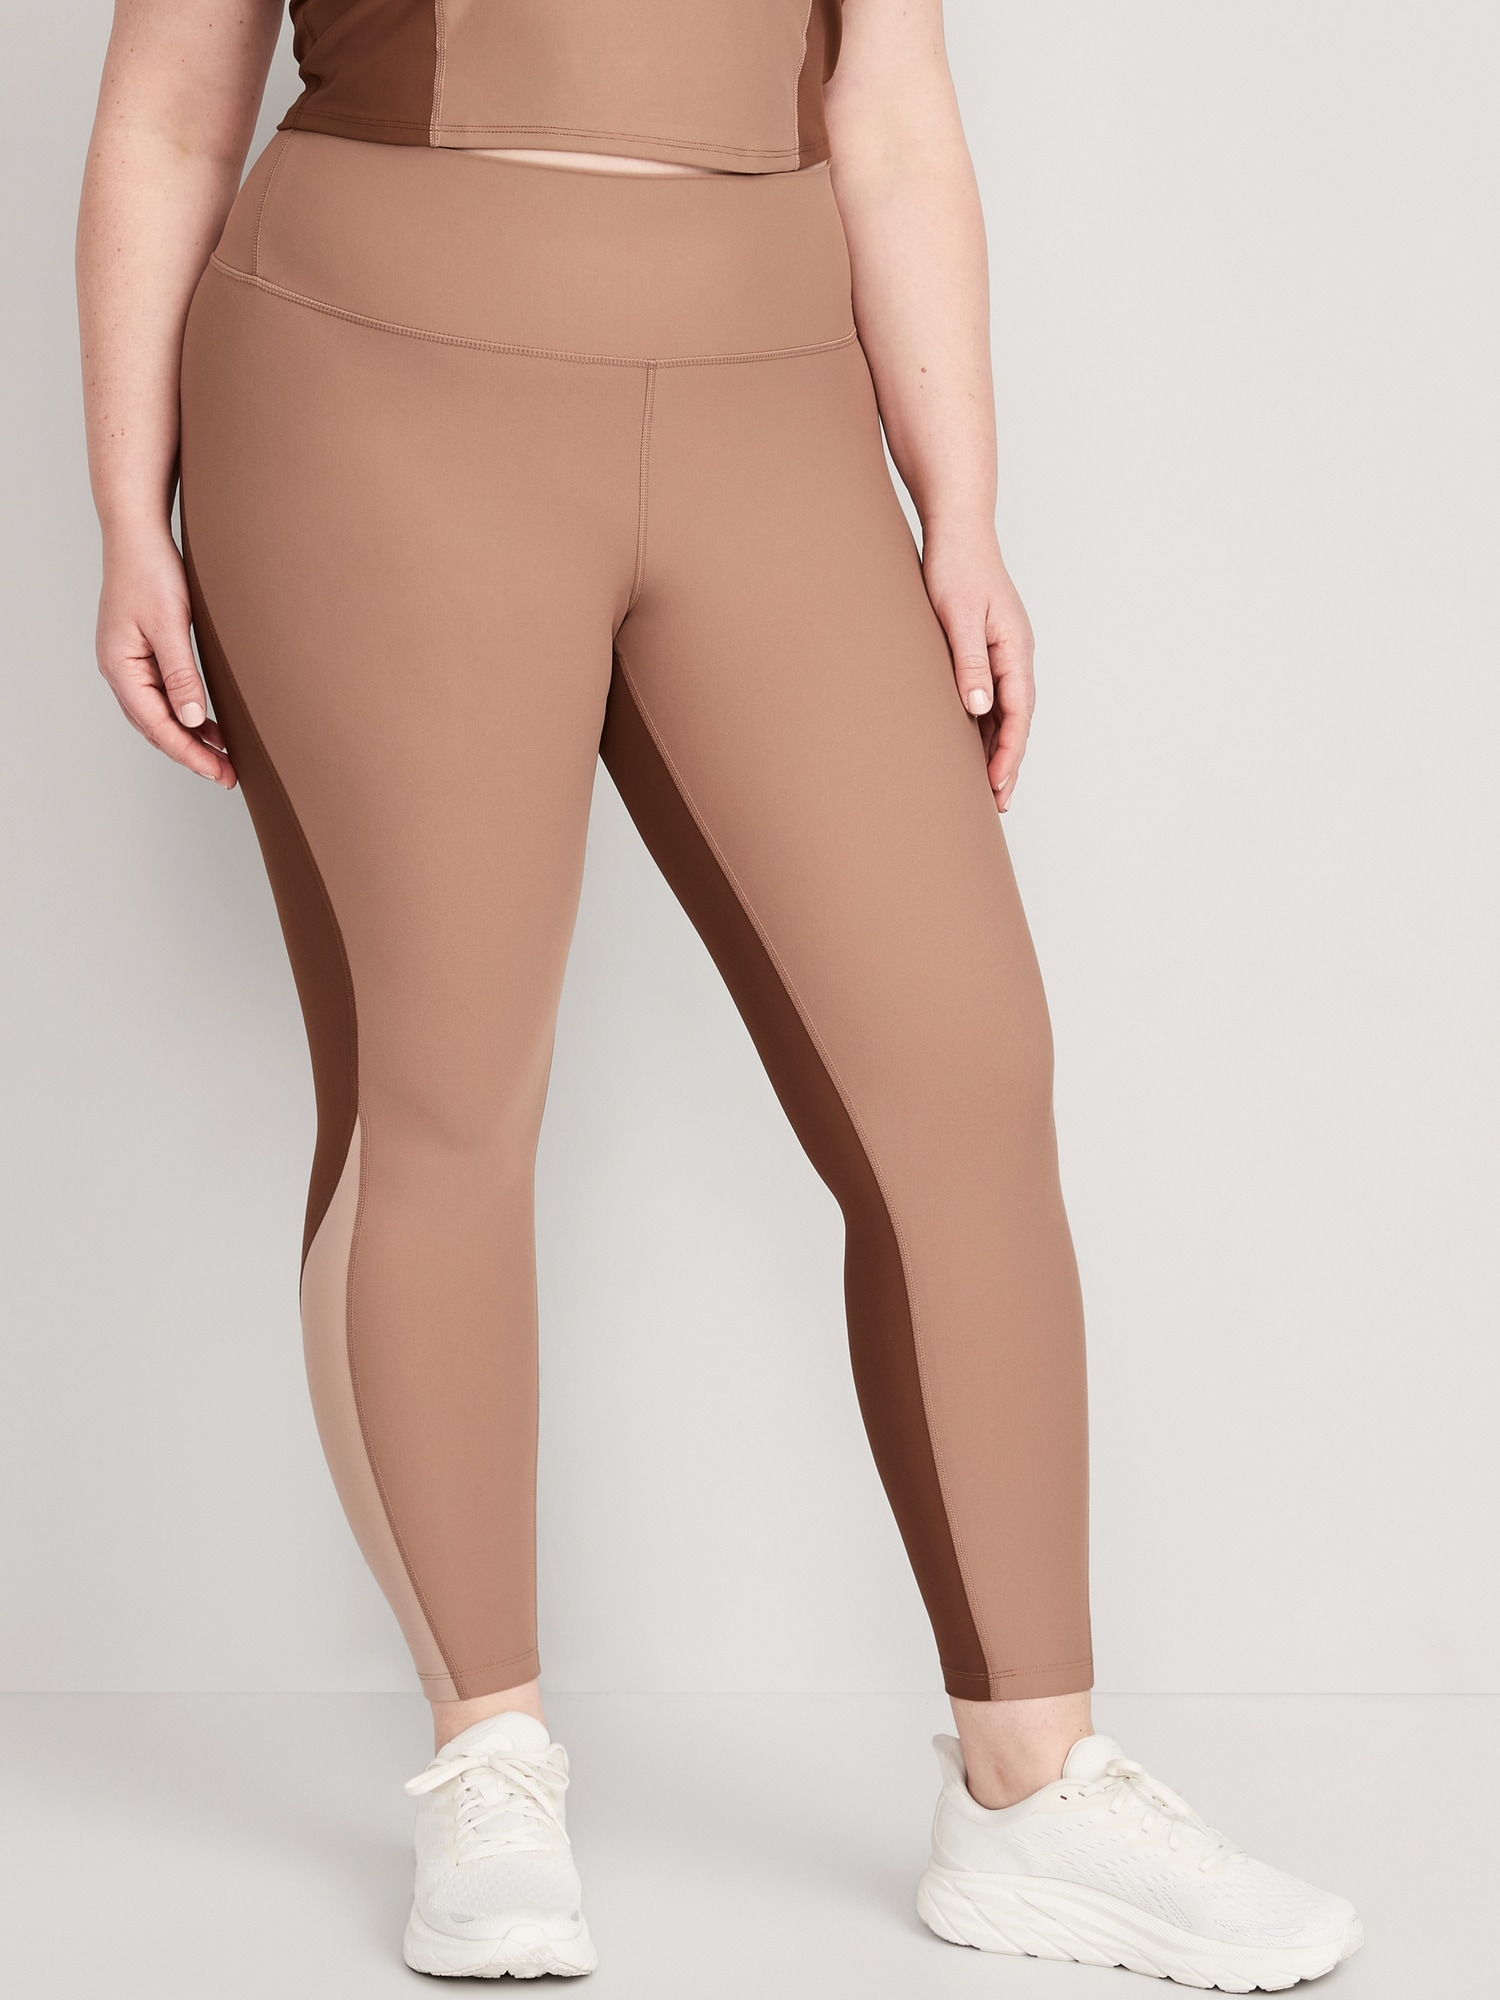 NWT: Old Navy Extra High-Waisted Powersoft Lt. Compression Leggings, Large